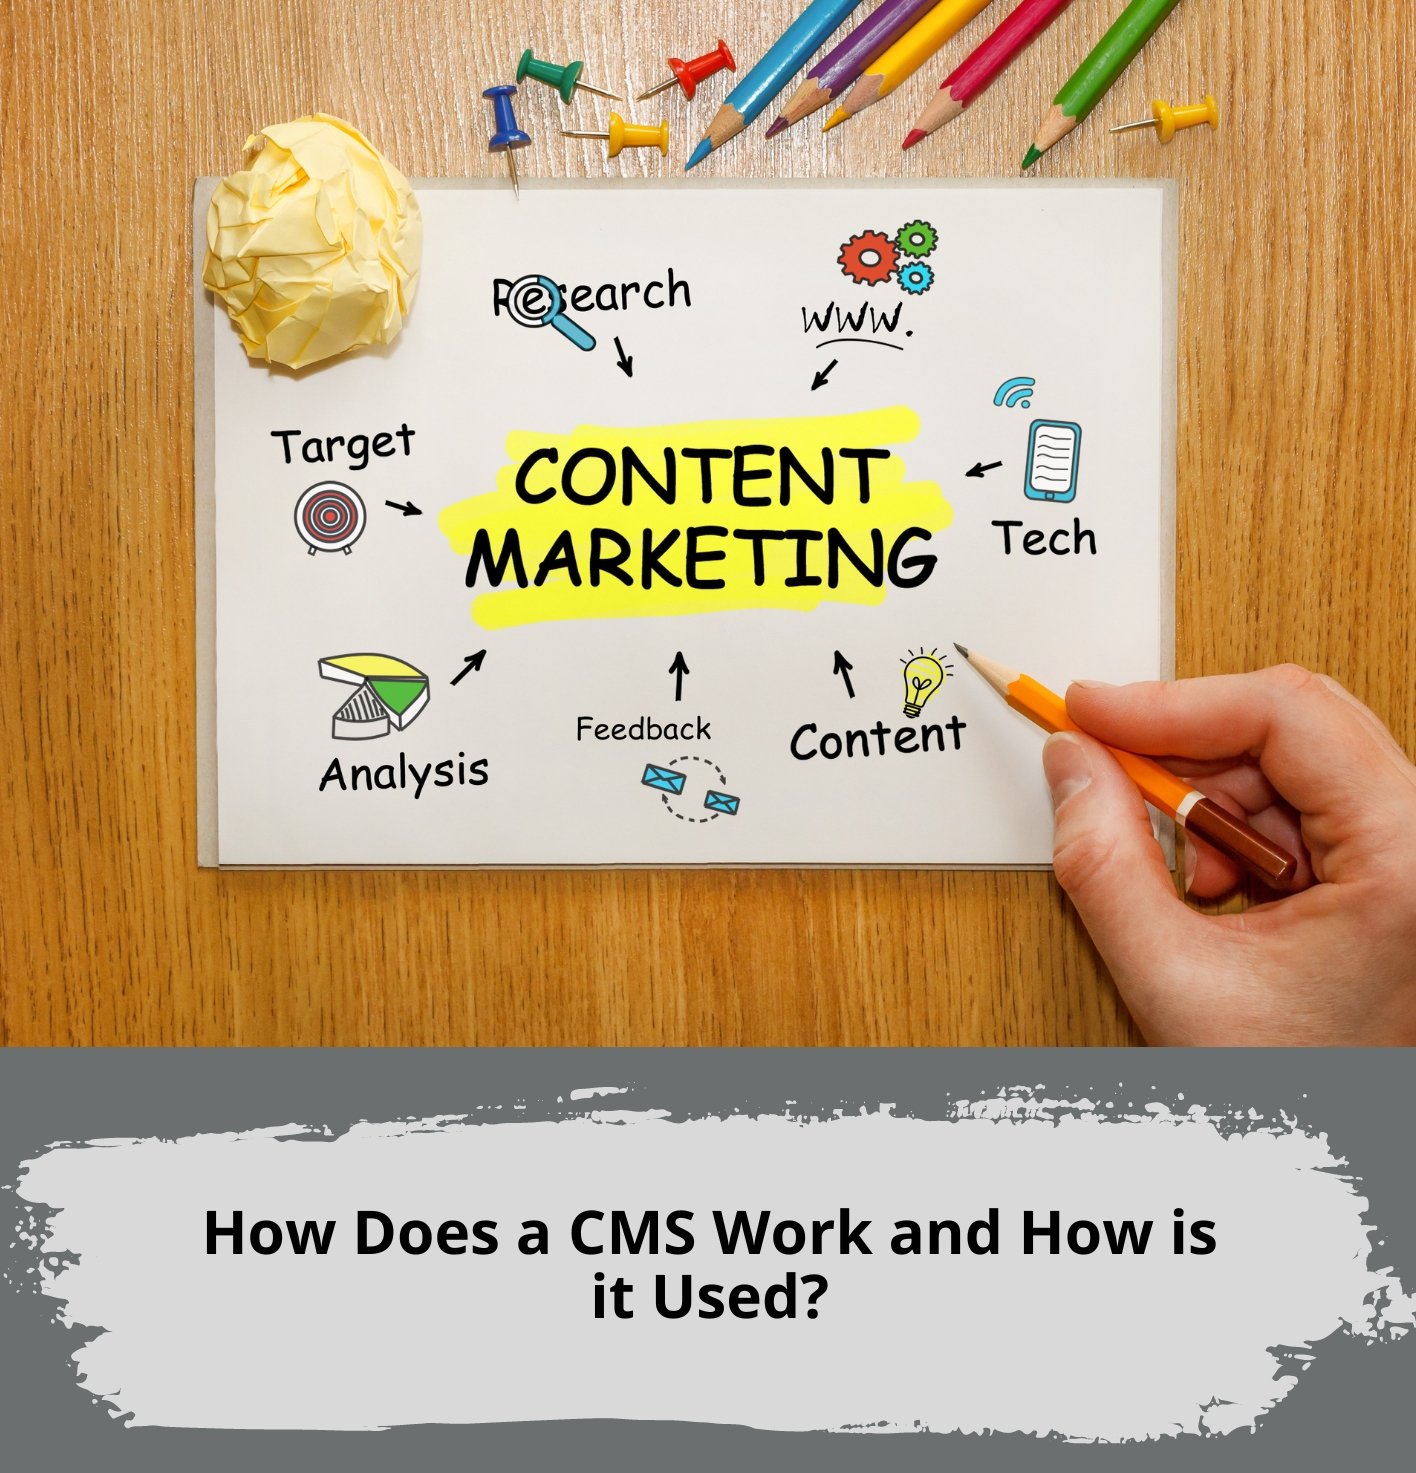 How Does a CMS Work and How is it Used?